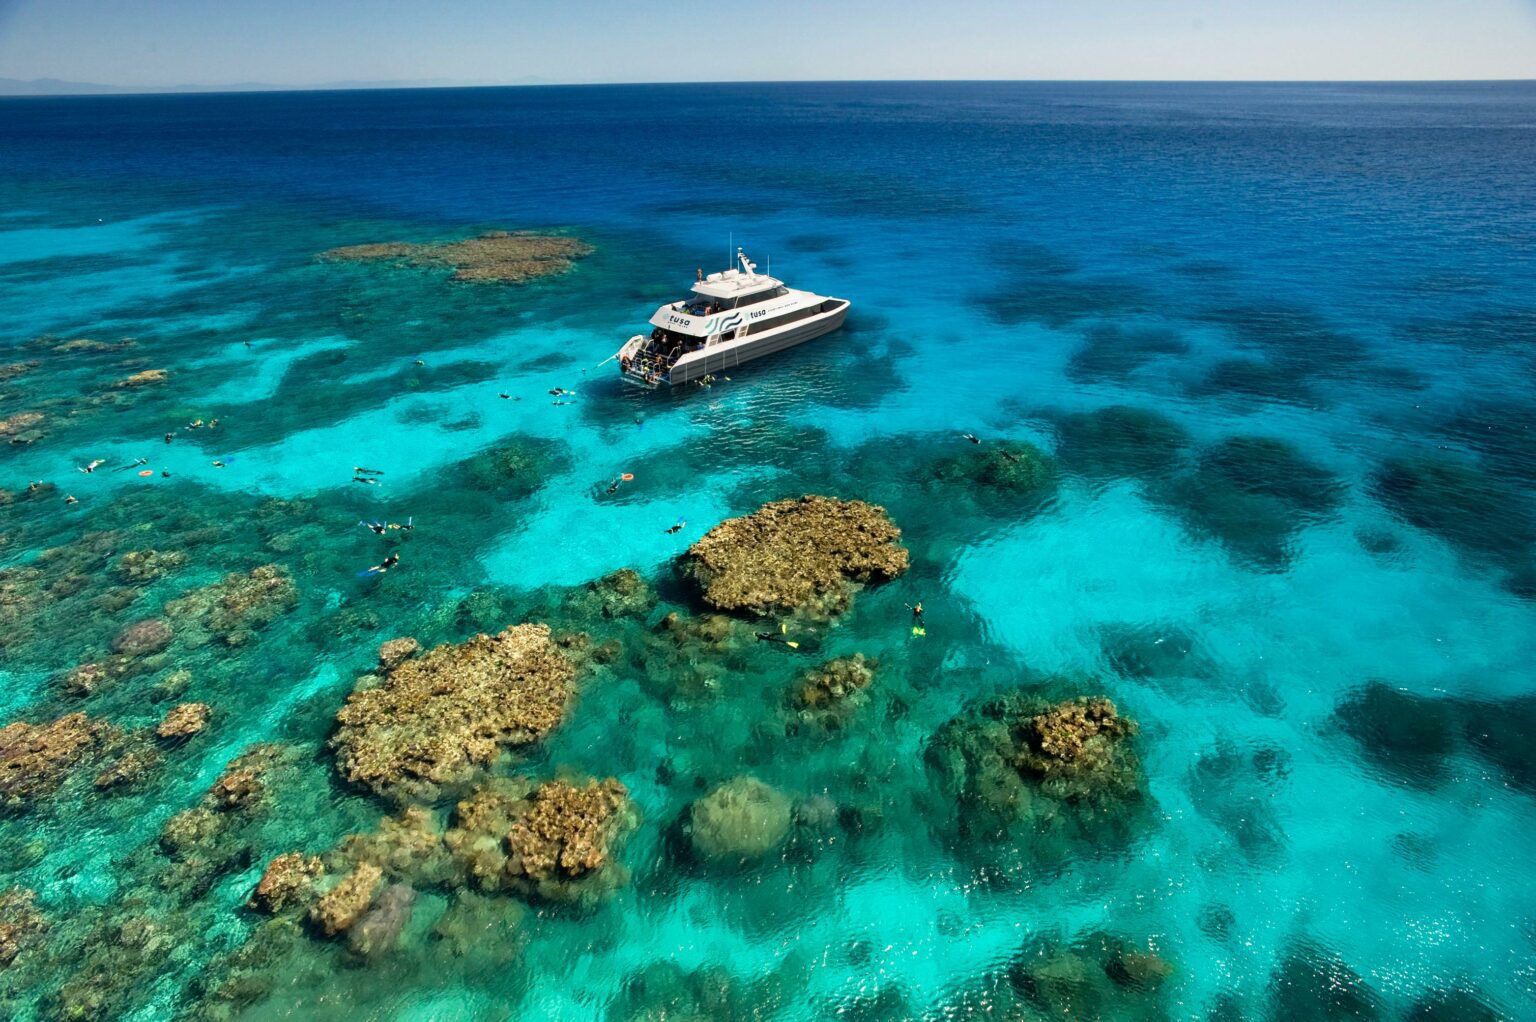 Tusa Reef Tours Relaunches with New Focus on Sustainability and Exclusivity